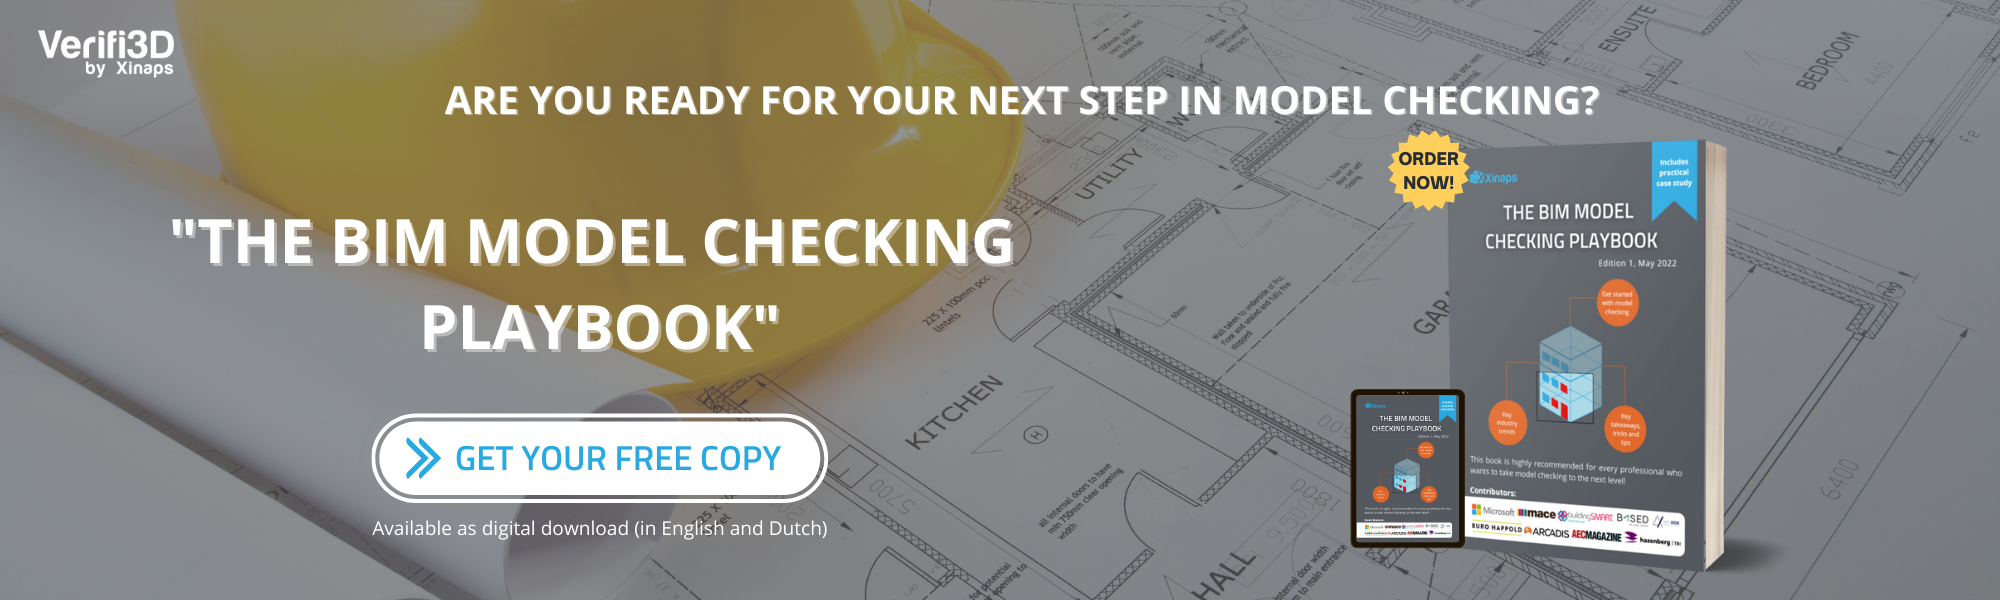 The BIM Model Checking Playbook – Order Now